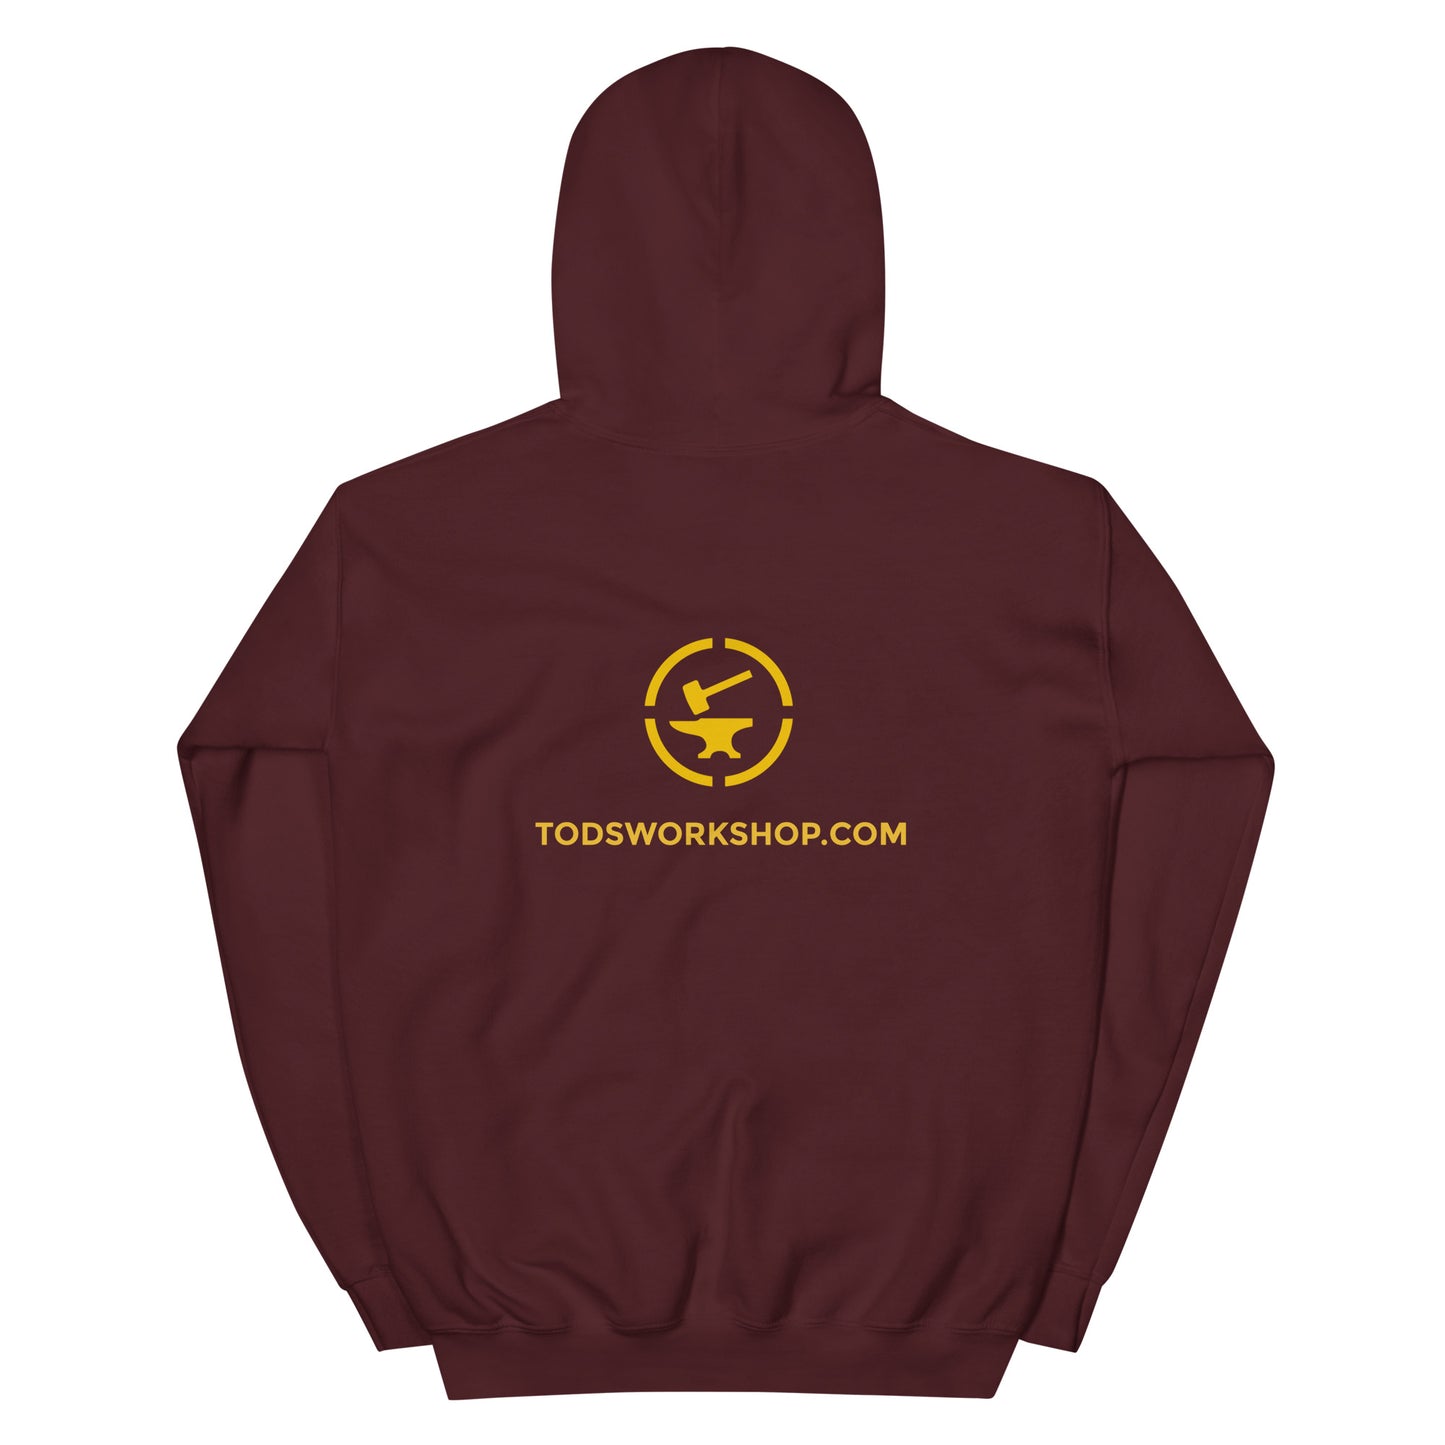 
                  
                    'Irresistible Force, Immovable Object' - Tod's Workshop Unisex Hoodie
                  
                